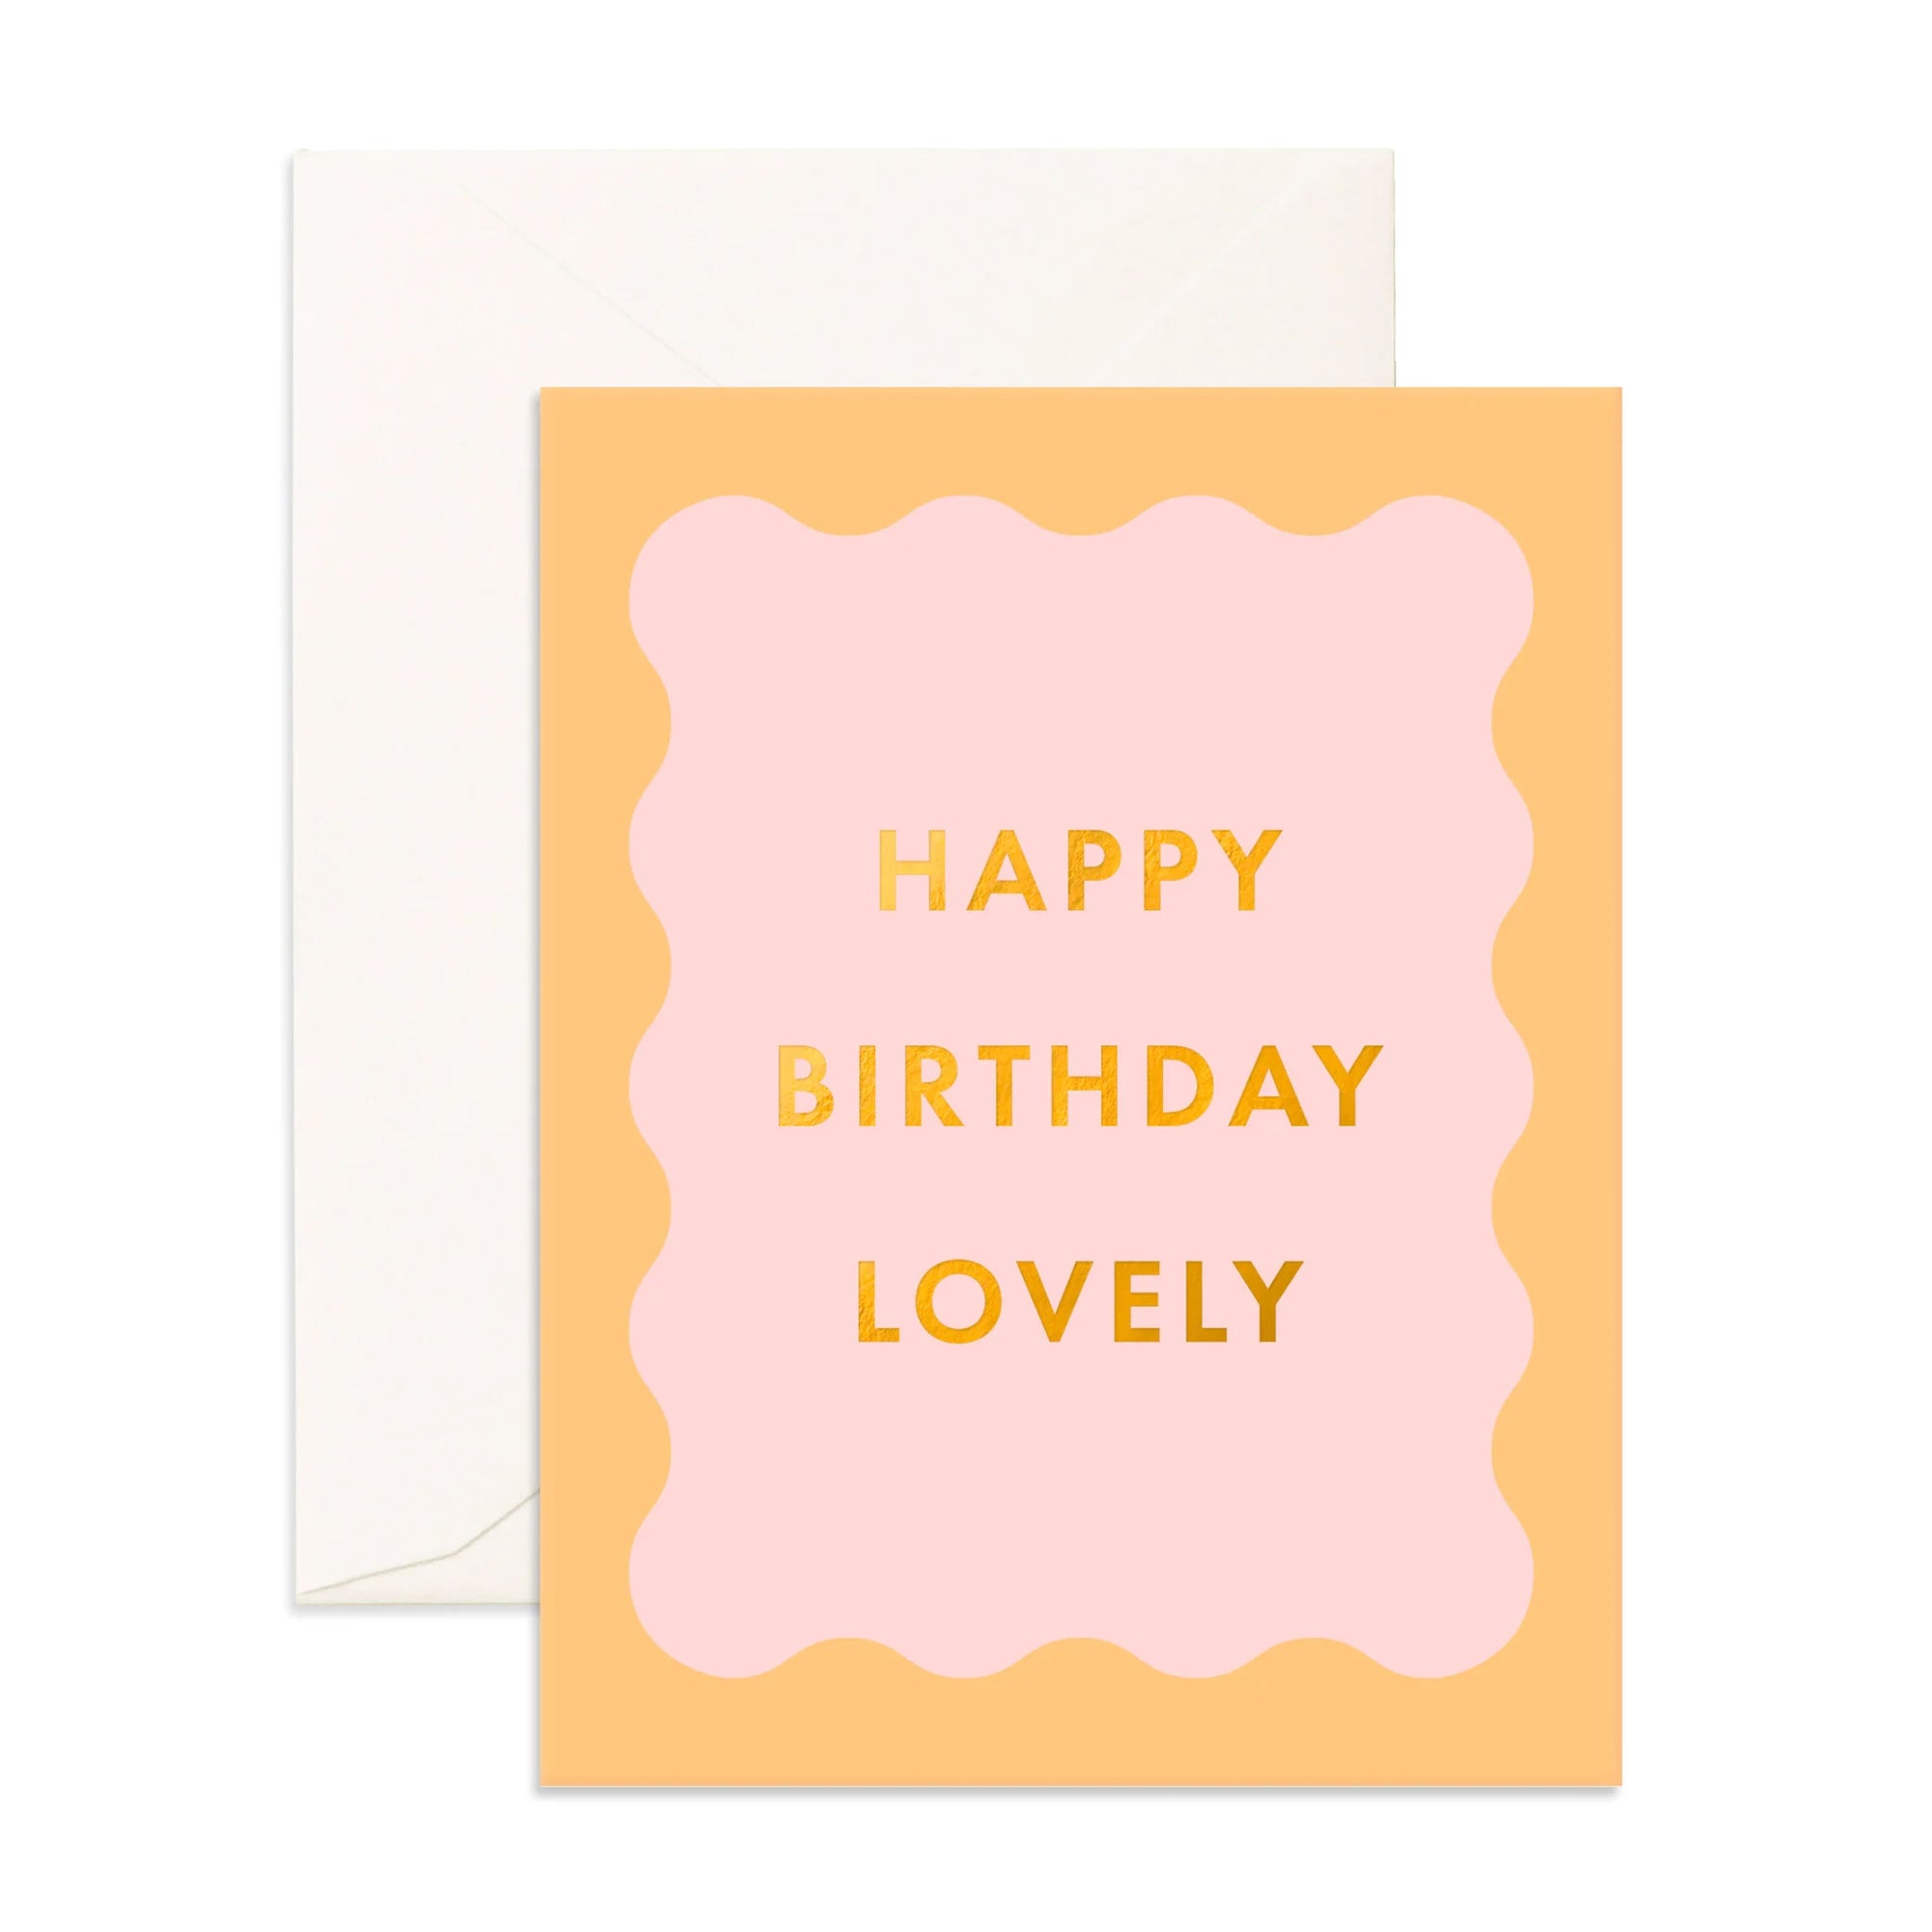 Birthday Lovely Wiggle Greeting Card